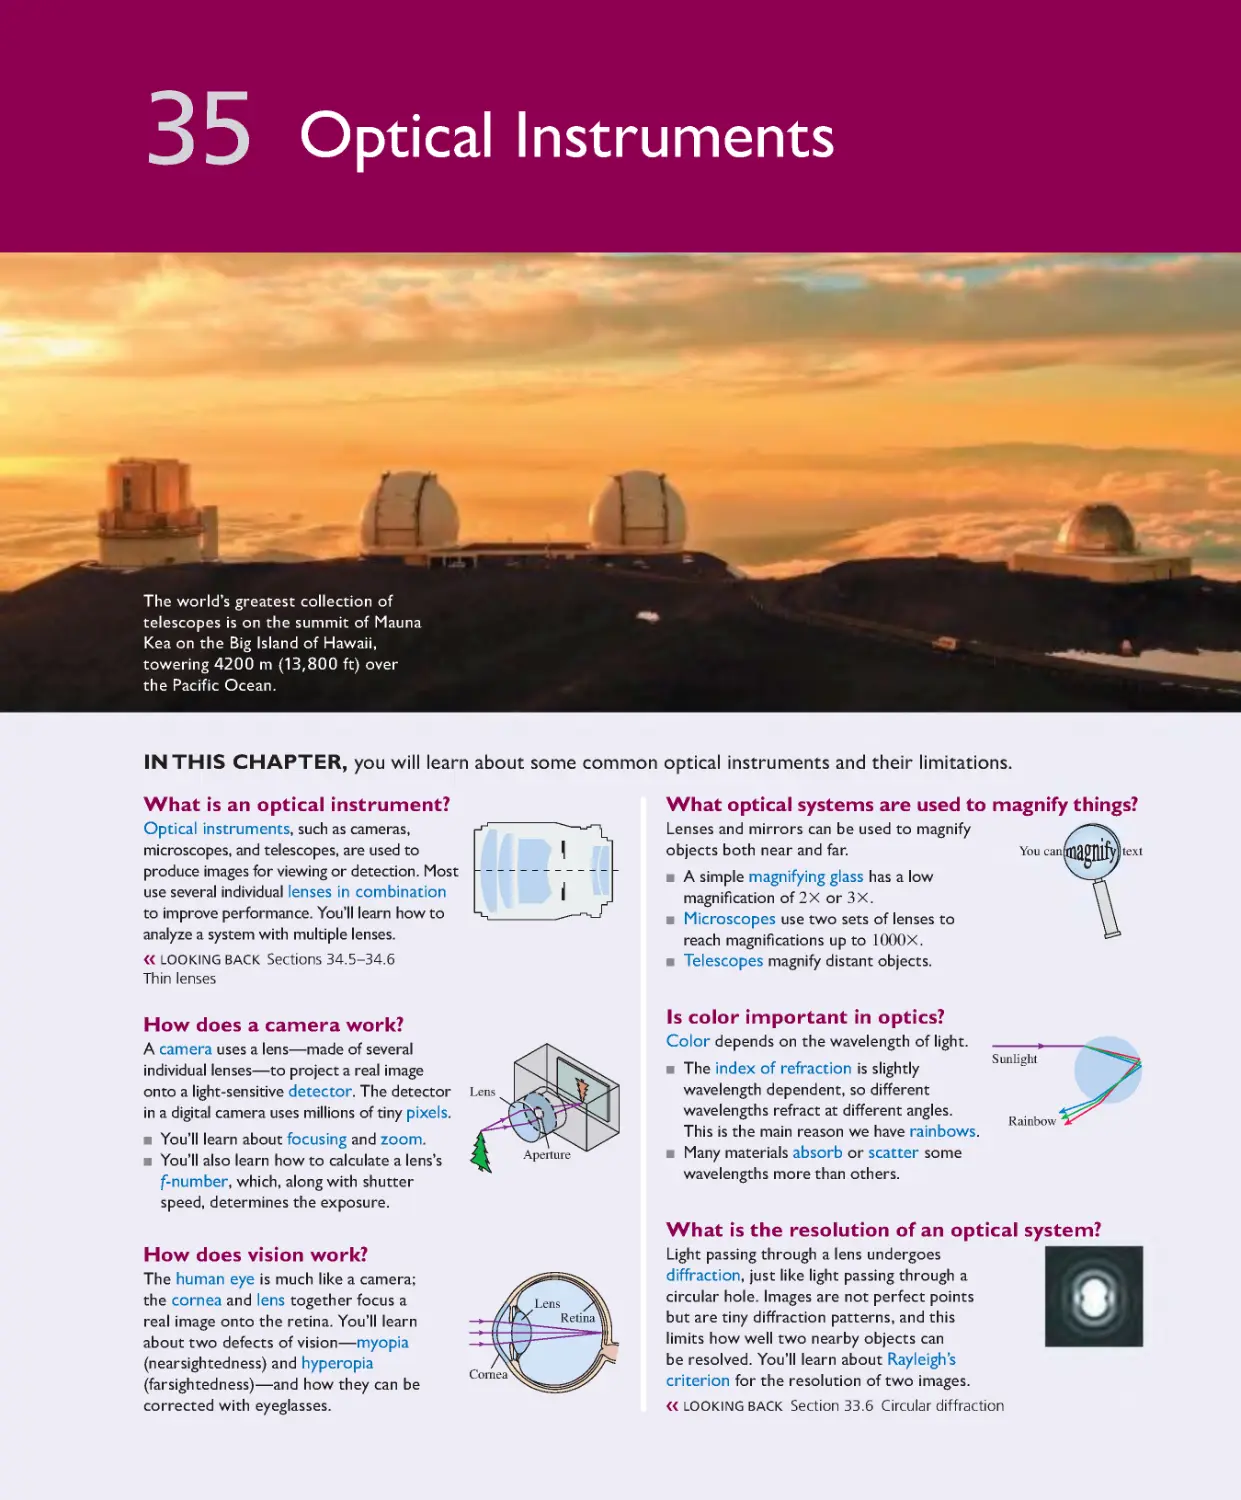 Chapter 35: Optical Instruments